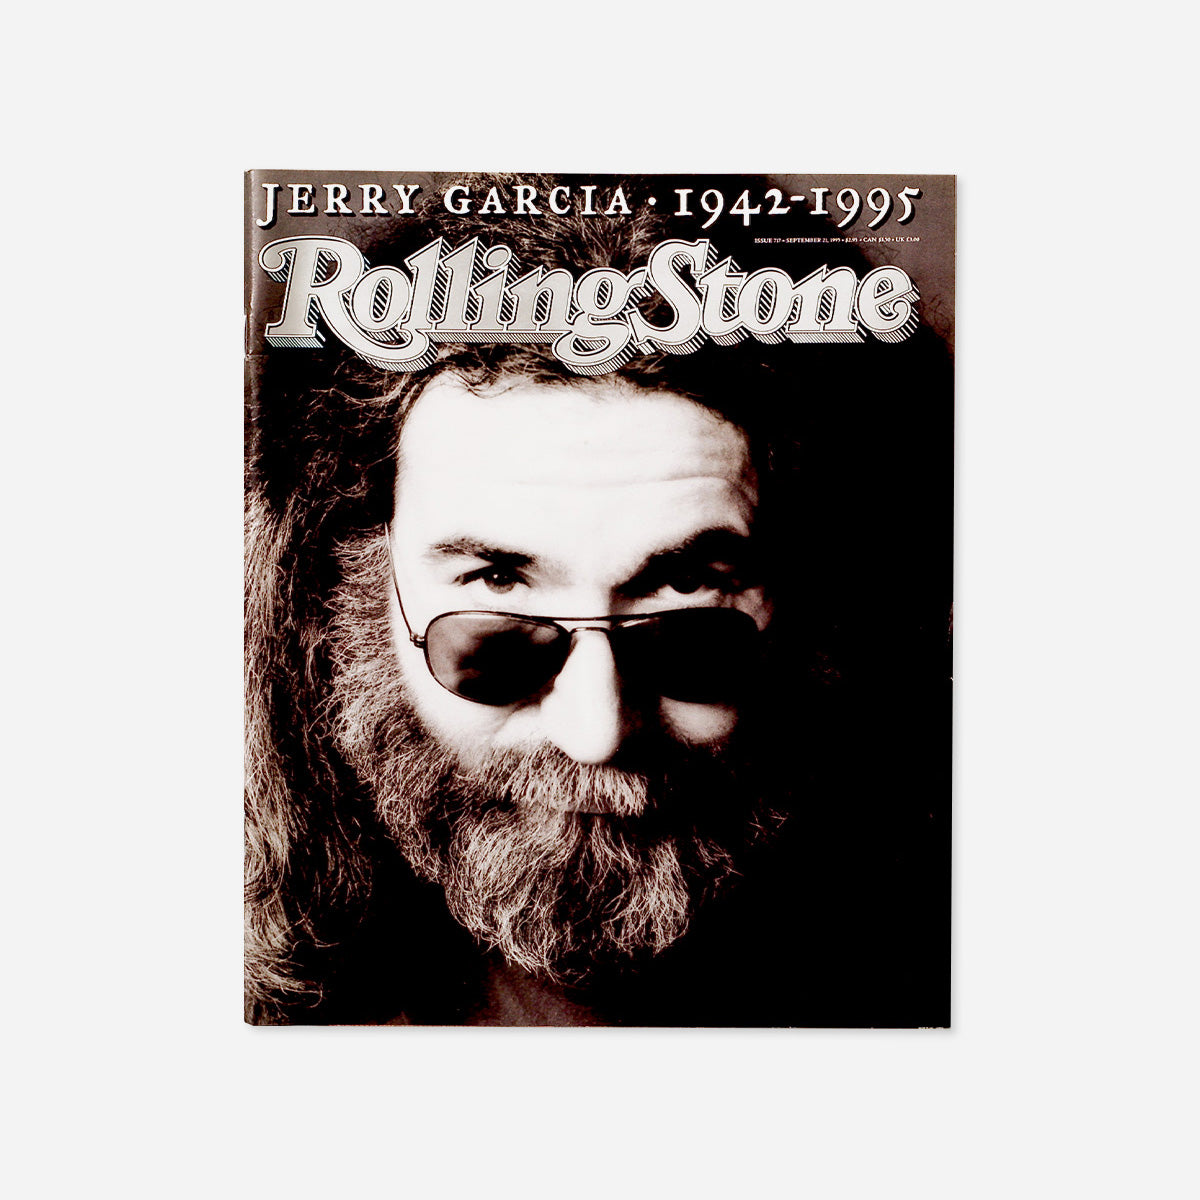 Rolling Stone Magazine September 21, 1995 Featuring Jerry Garcia (Issue 717)